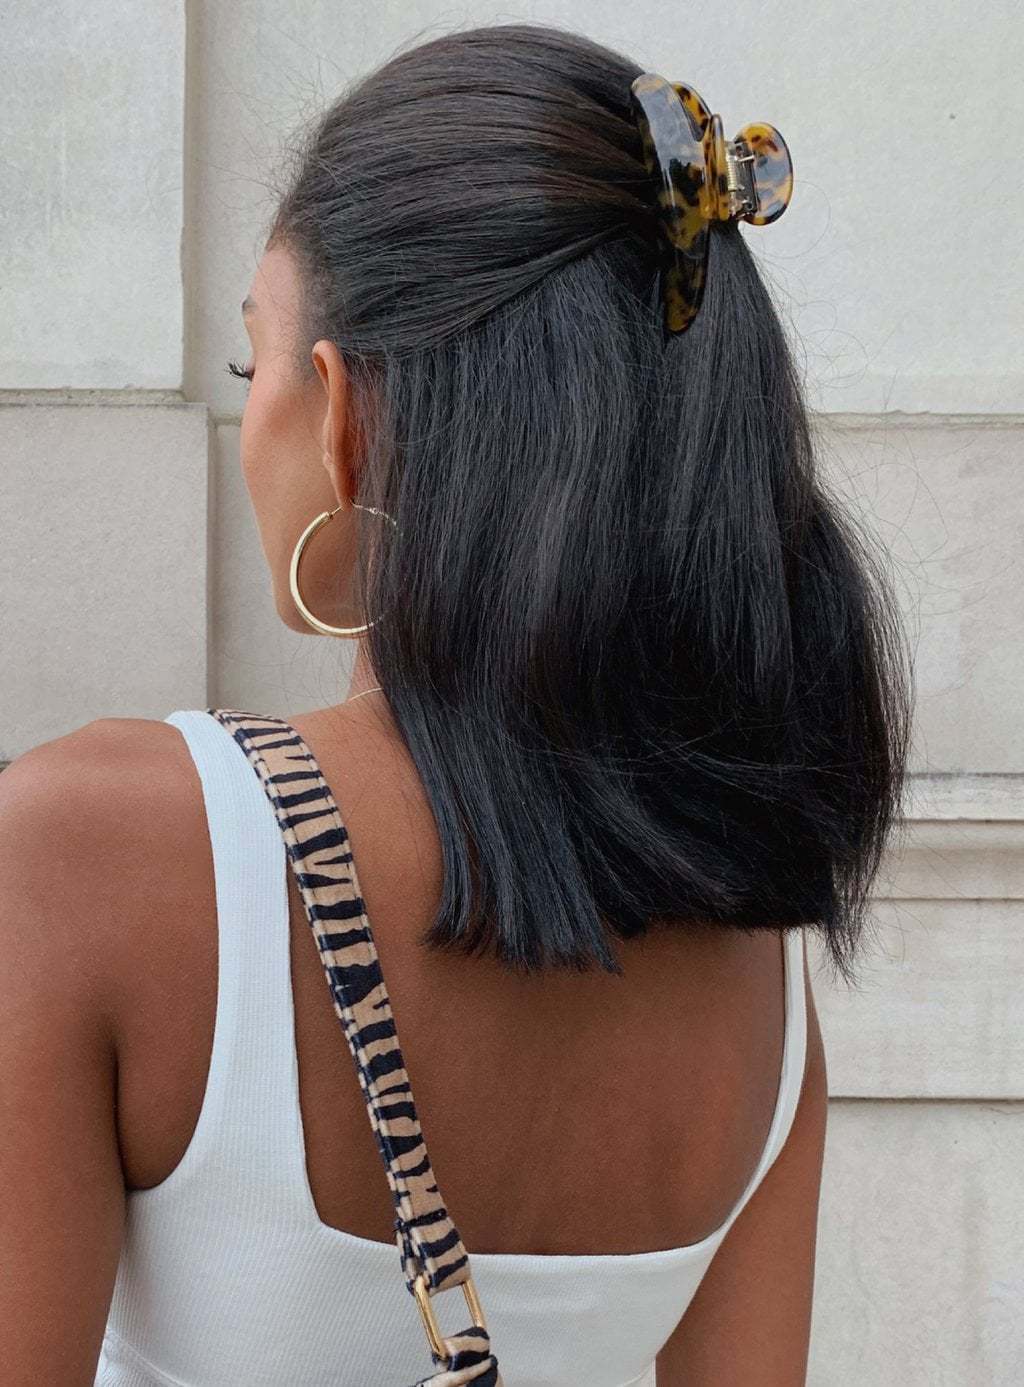 15 Hairstyles for Bridesmaids With Short Hair